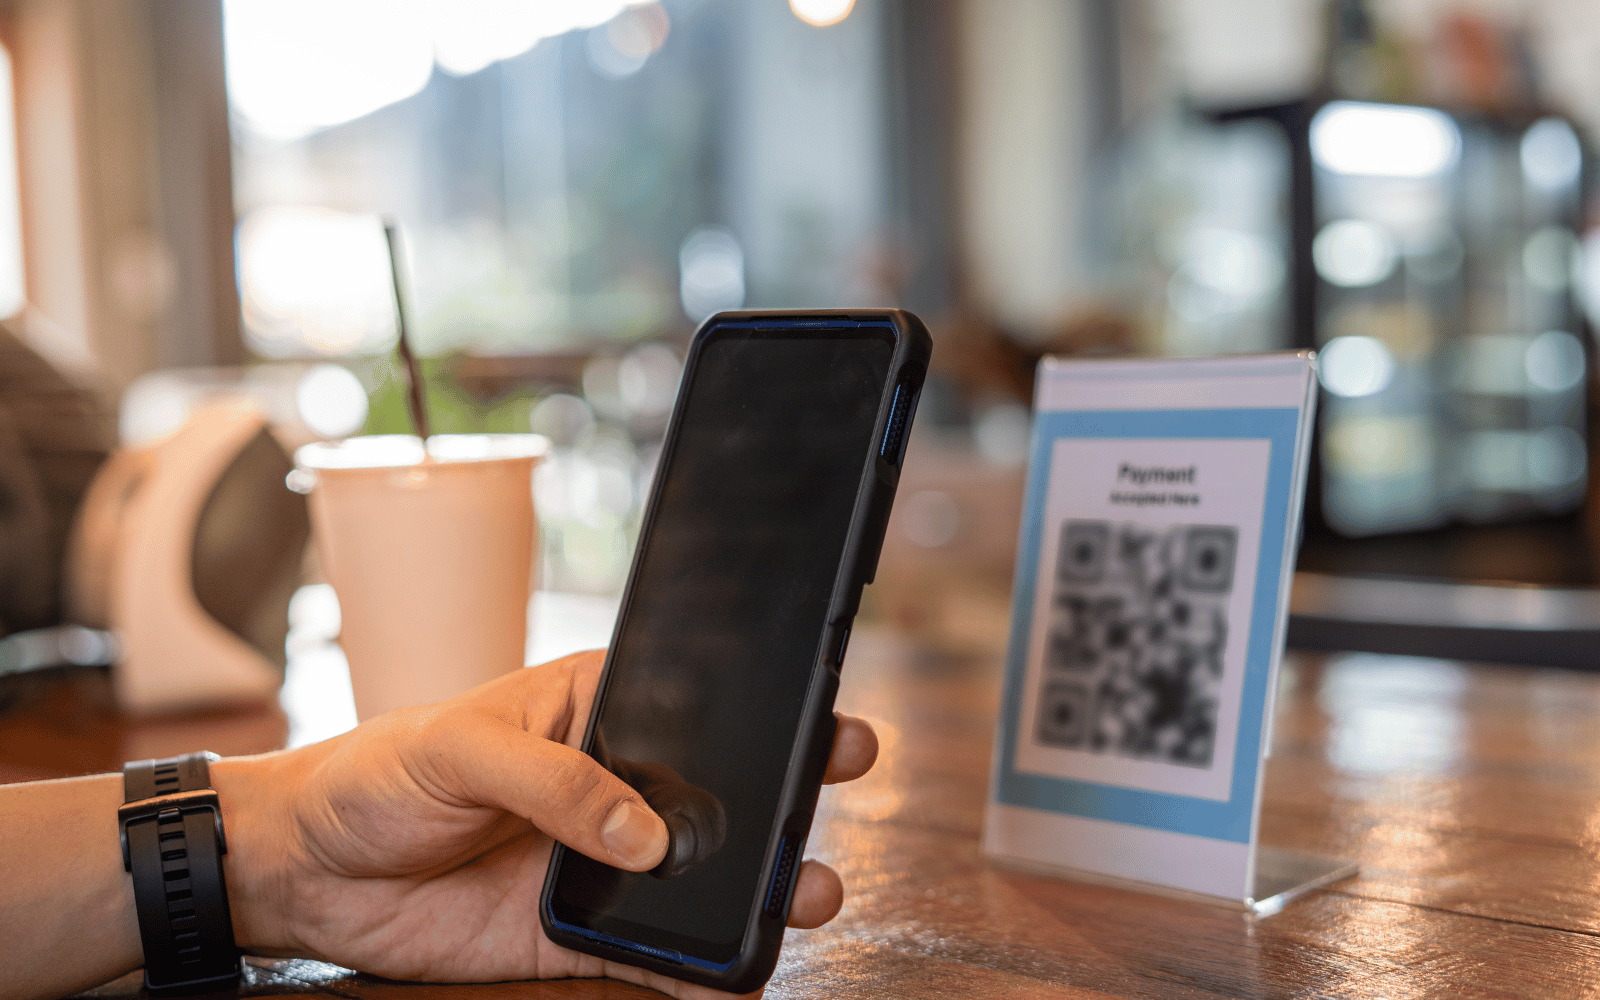 How to scan a QR code with your Xperia smartphone camera